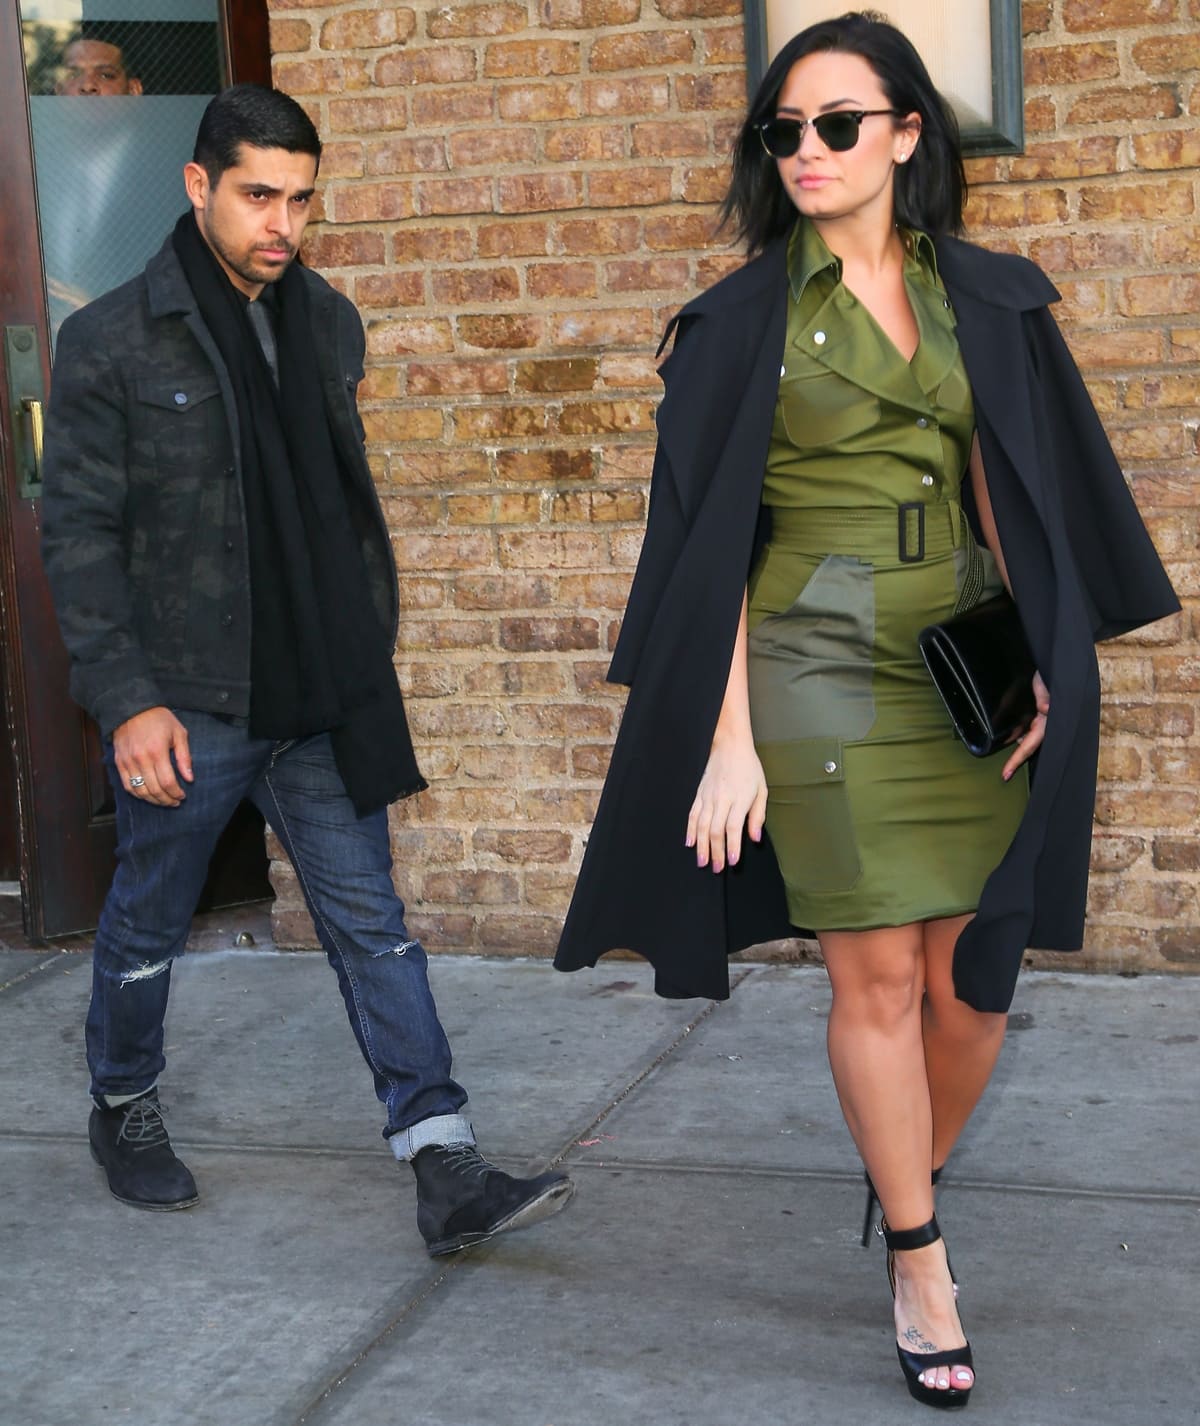 Demi Lovato and Wilmer Valderrama dated from 2010 to 2016 despite their 12-year age gap